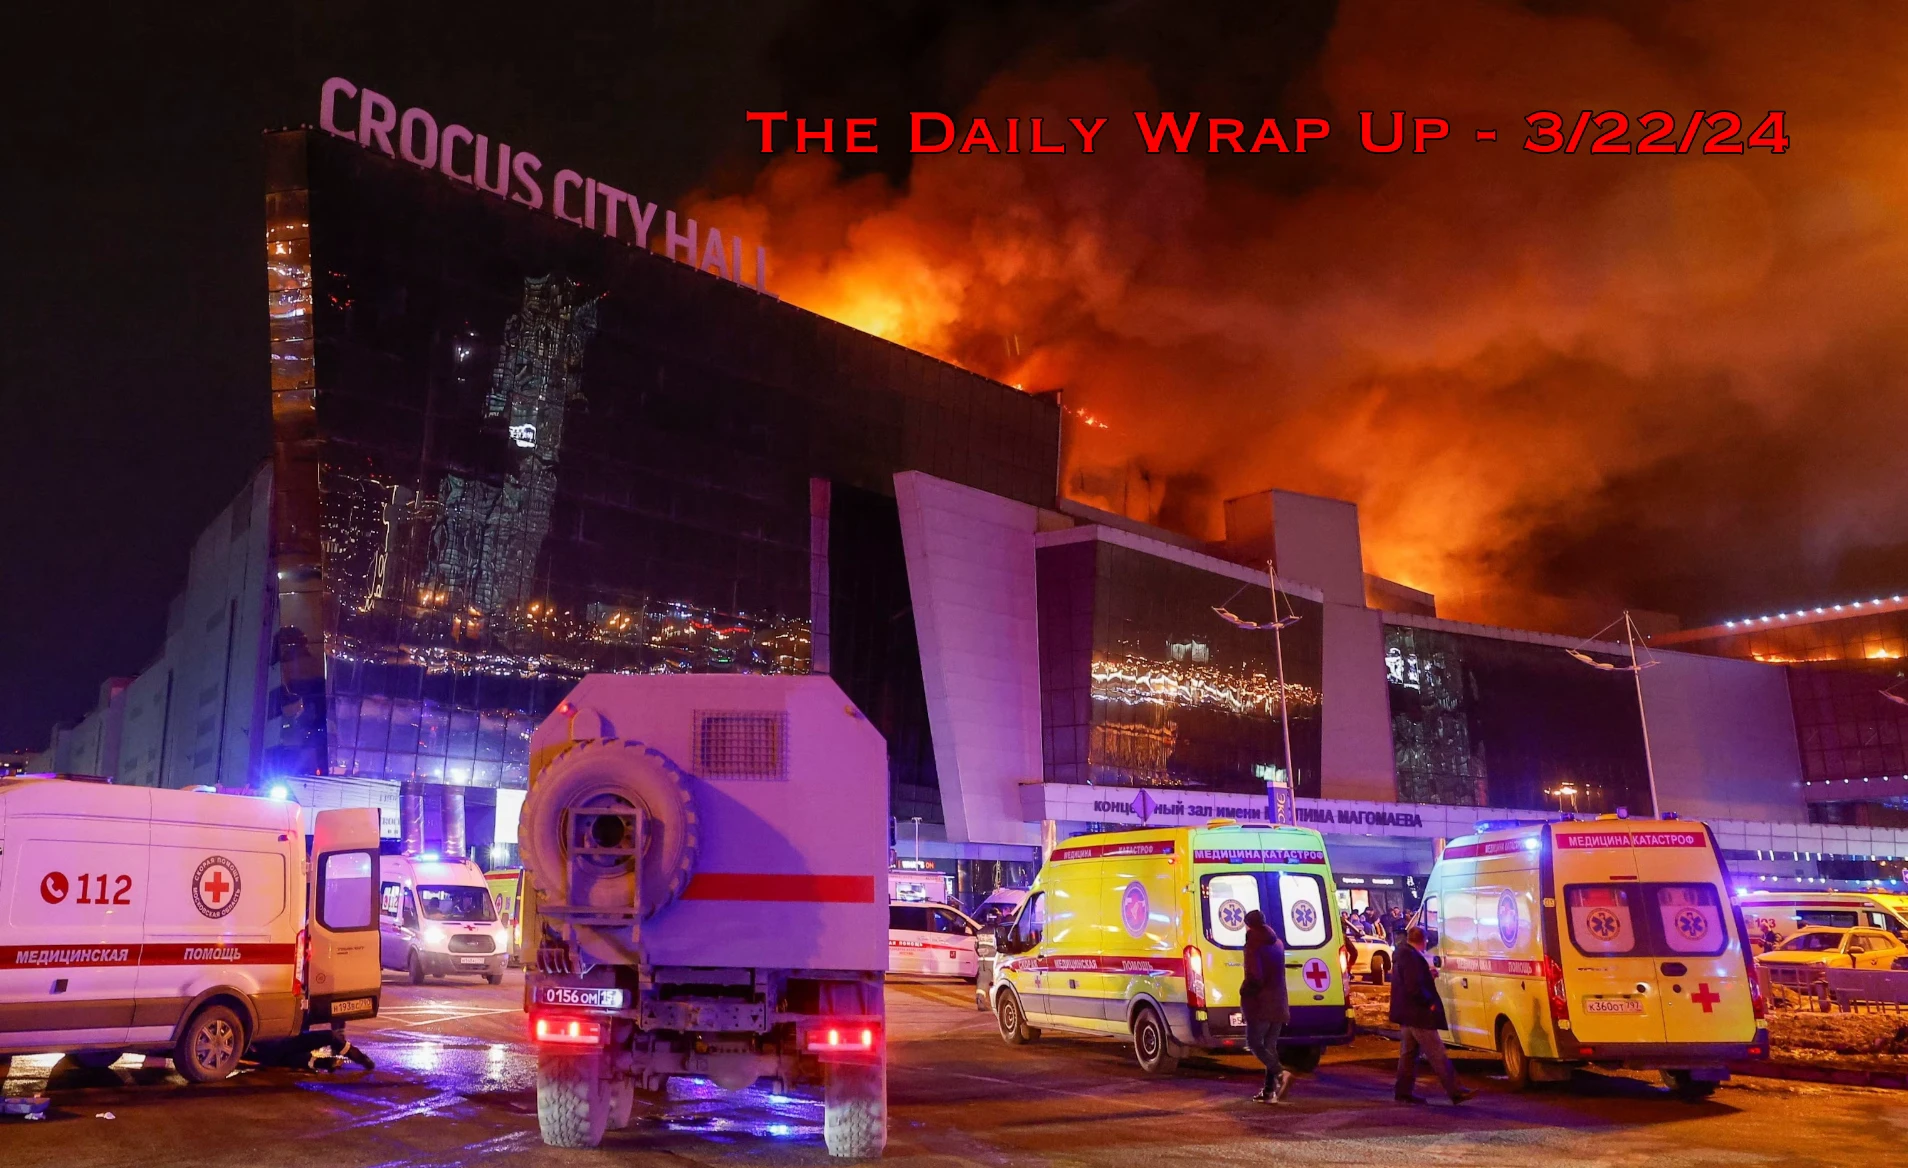 Who Is Behind The Moscow Crocus City Hall Attack?